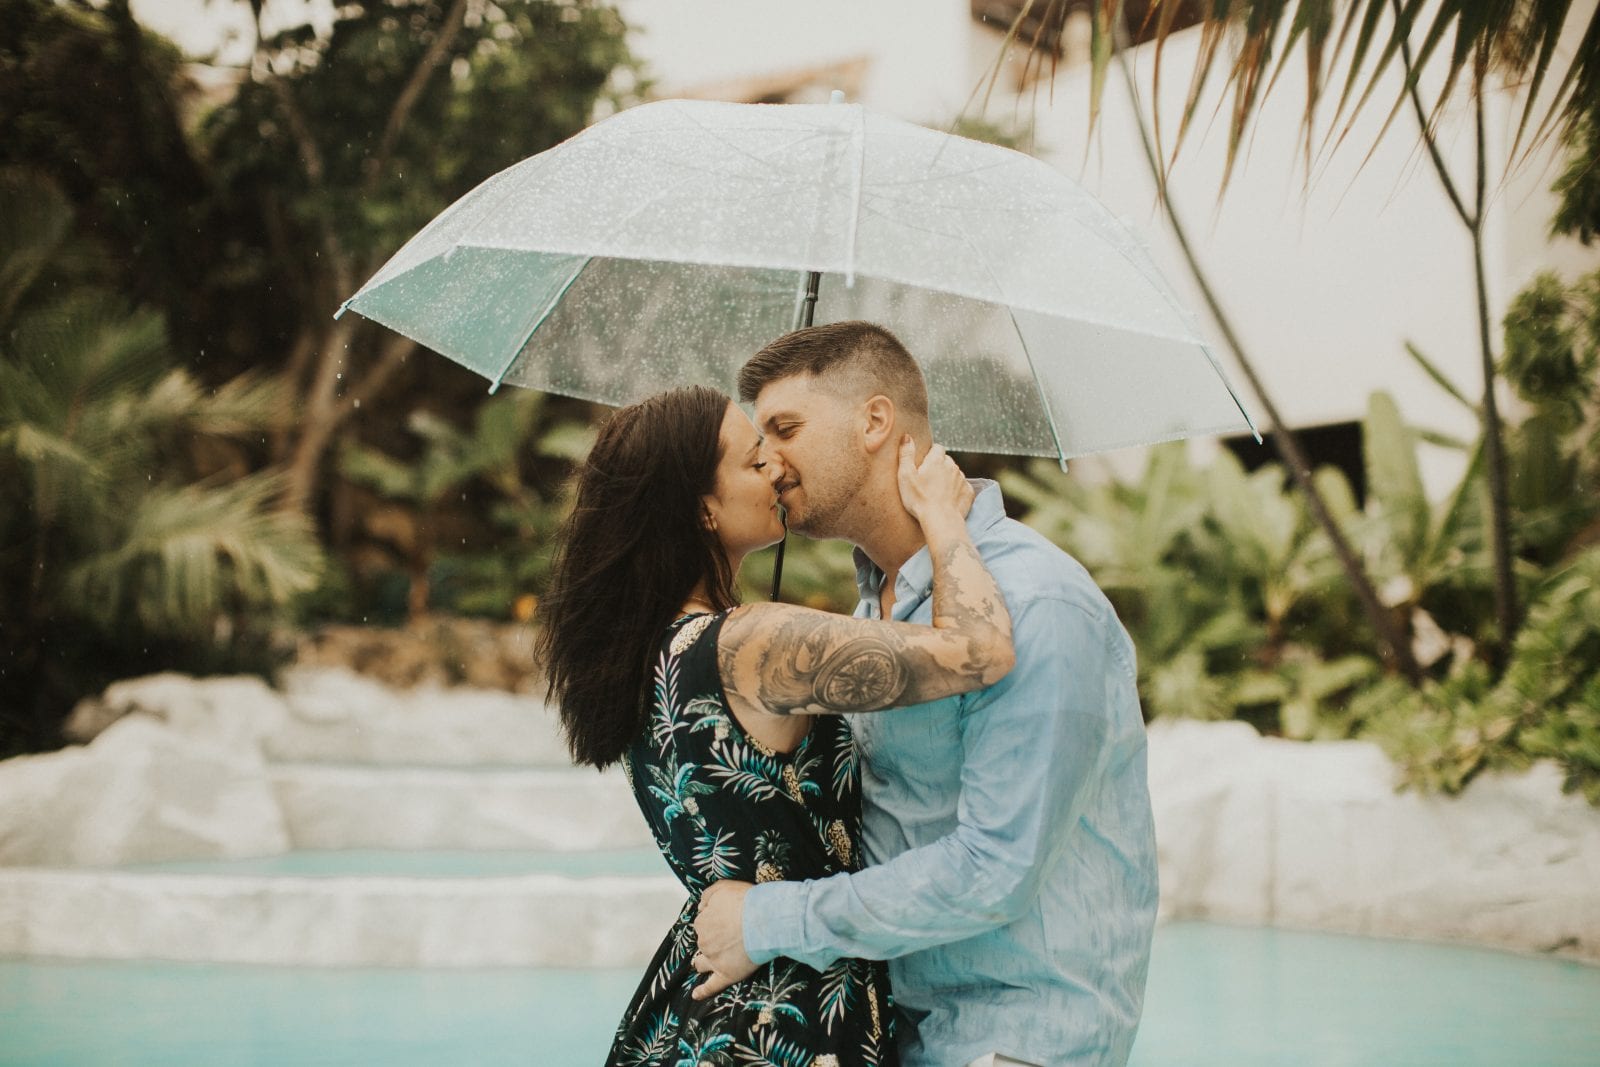 Keith contacted me just two days before he needed a couples session in Okinawa, but we made it happen - (despite the weather!) Click here to check it out!